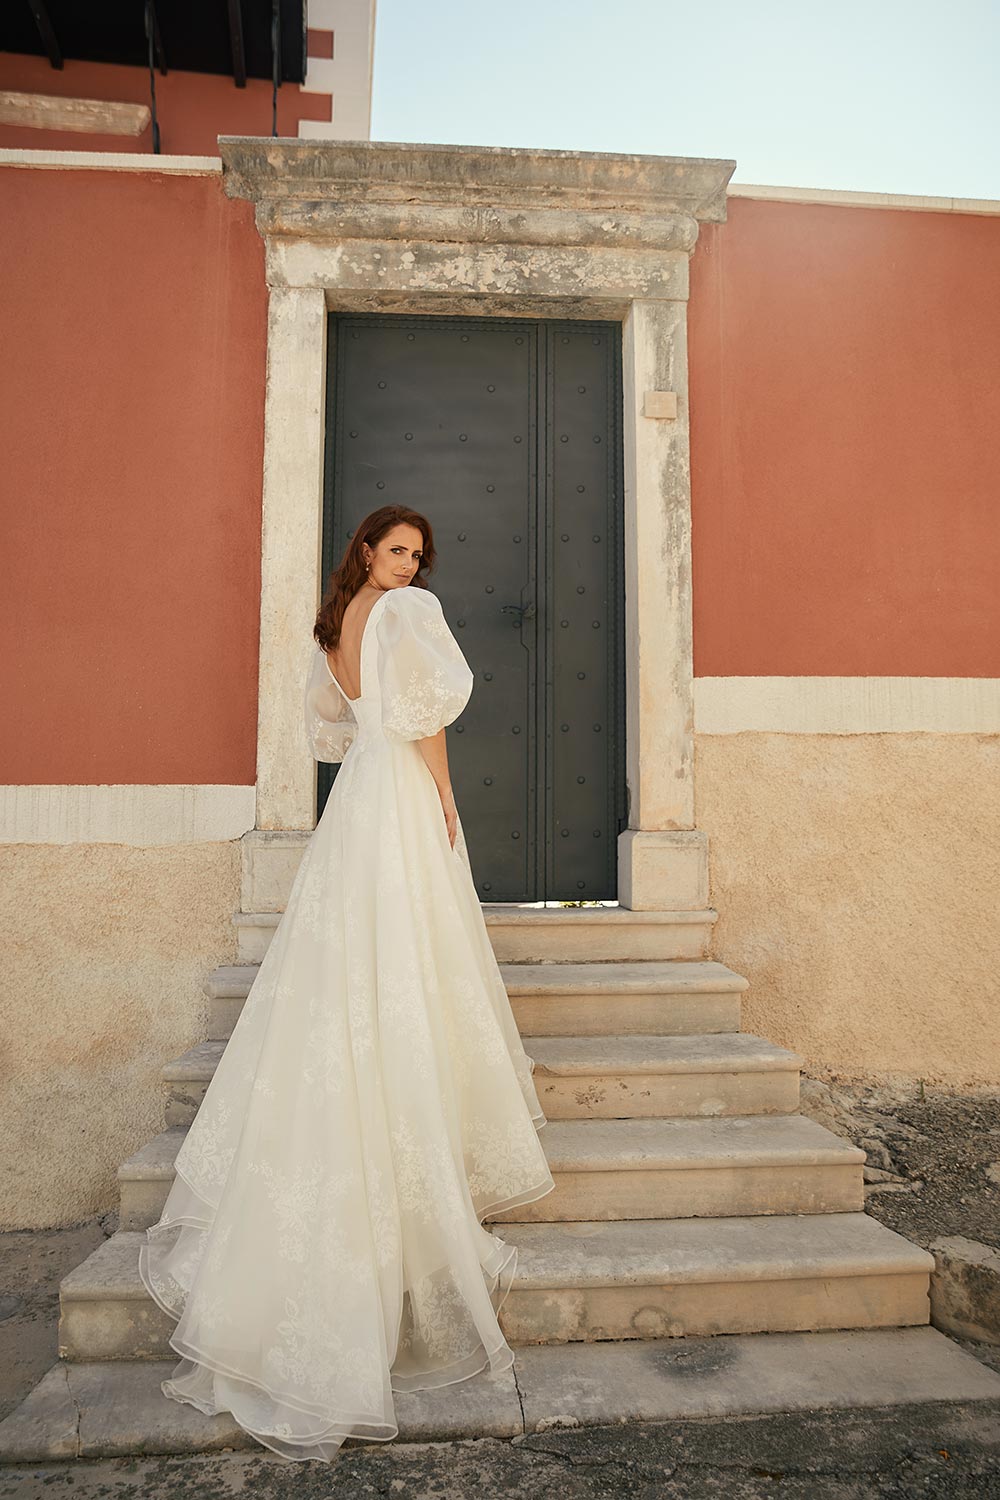 Discover Wedding Gown Bianca's blend of boldness and fragility. Features a plunging V-neckline, basque waist, sweeping silk organza train & detachable sleeves. Vinka Design